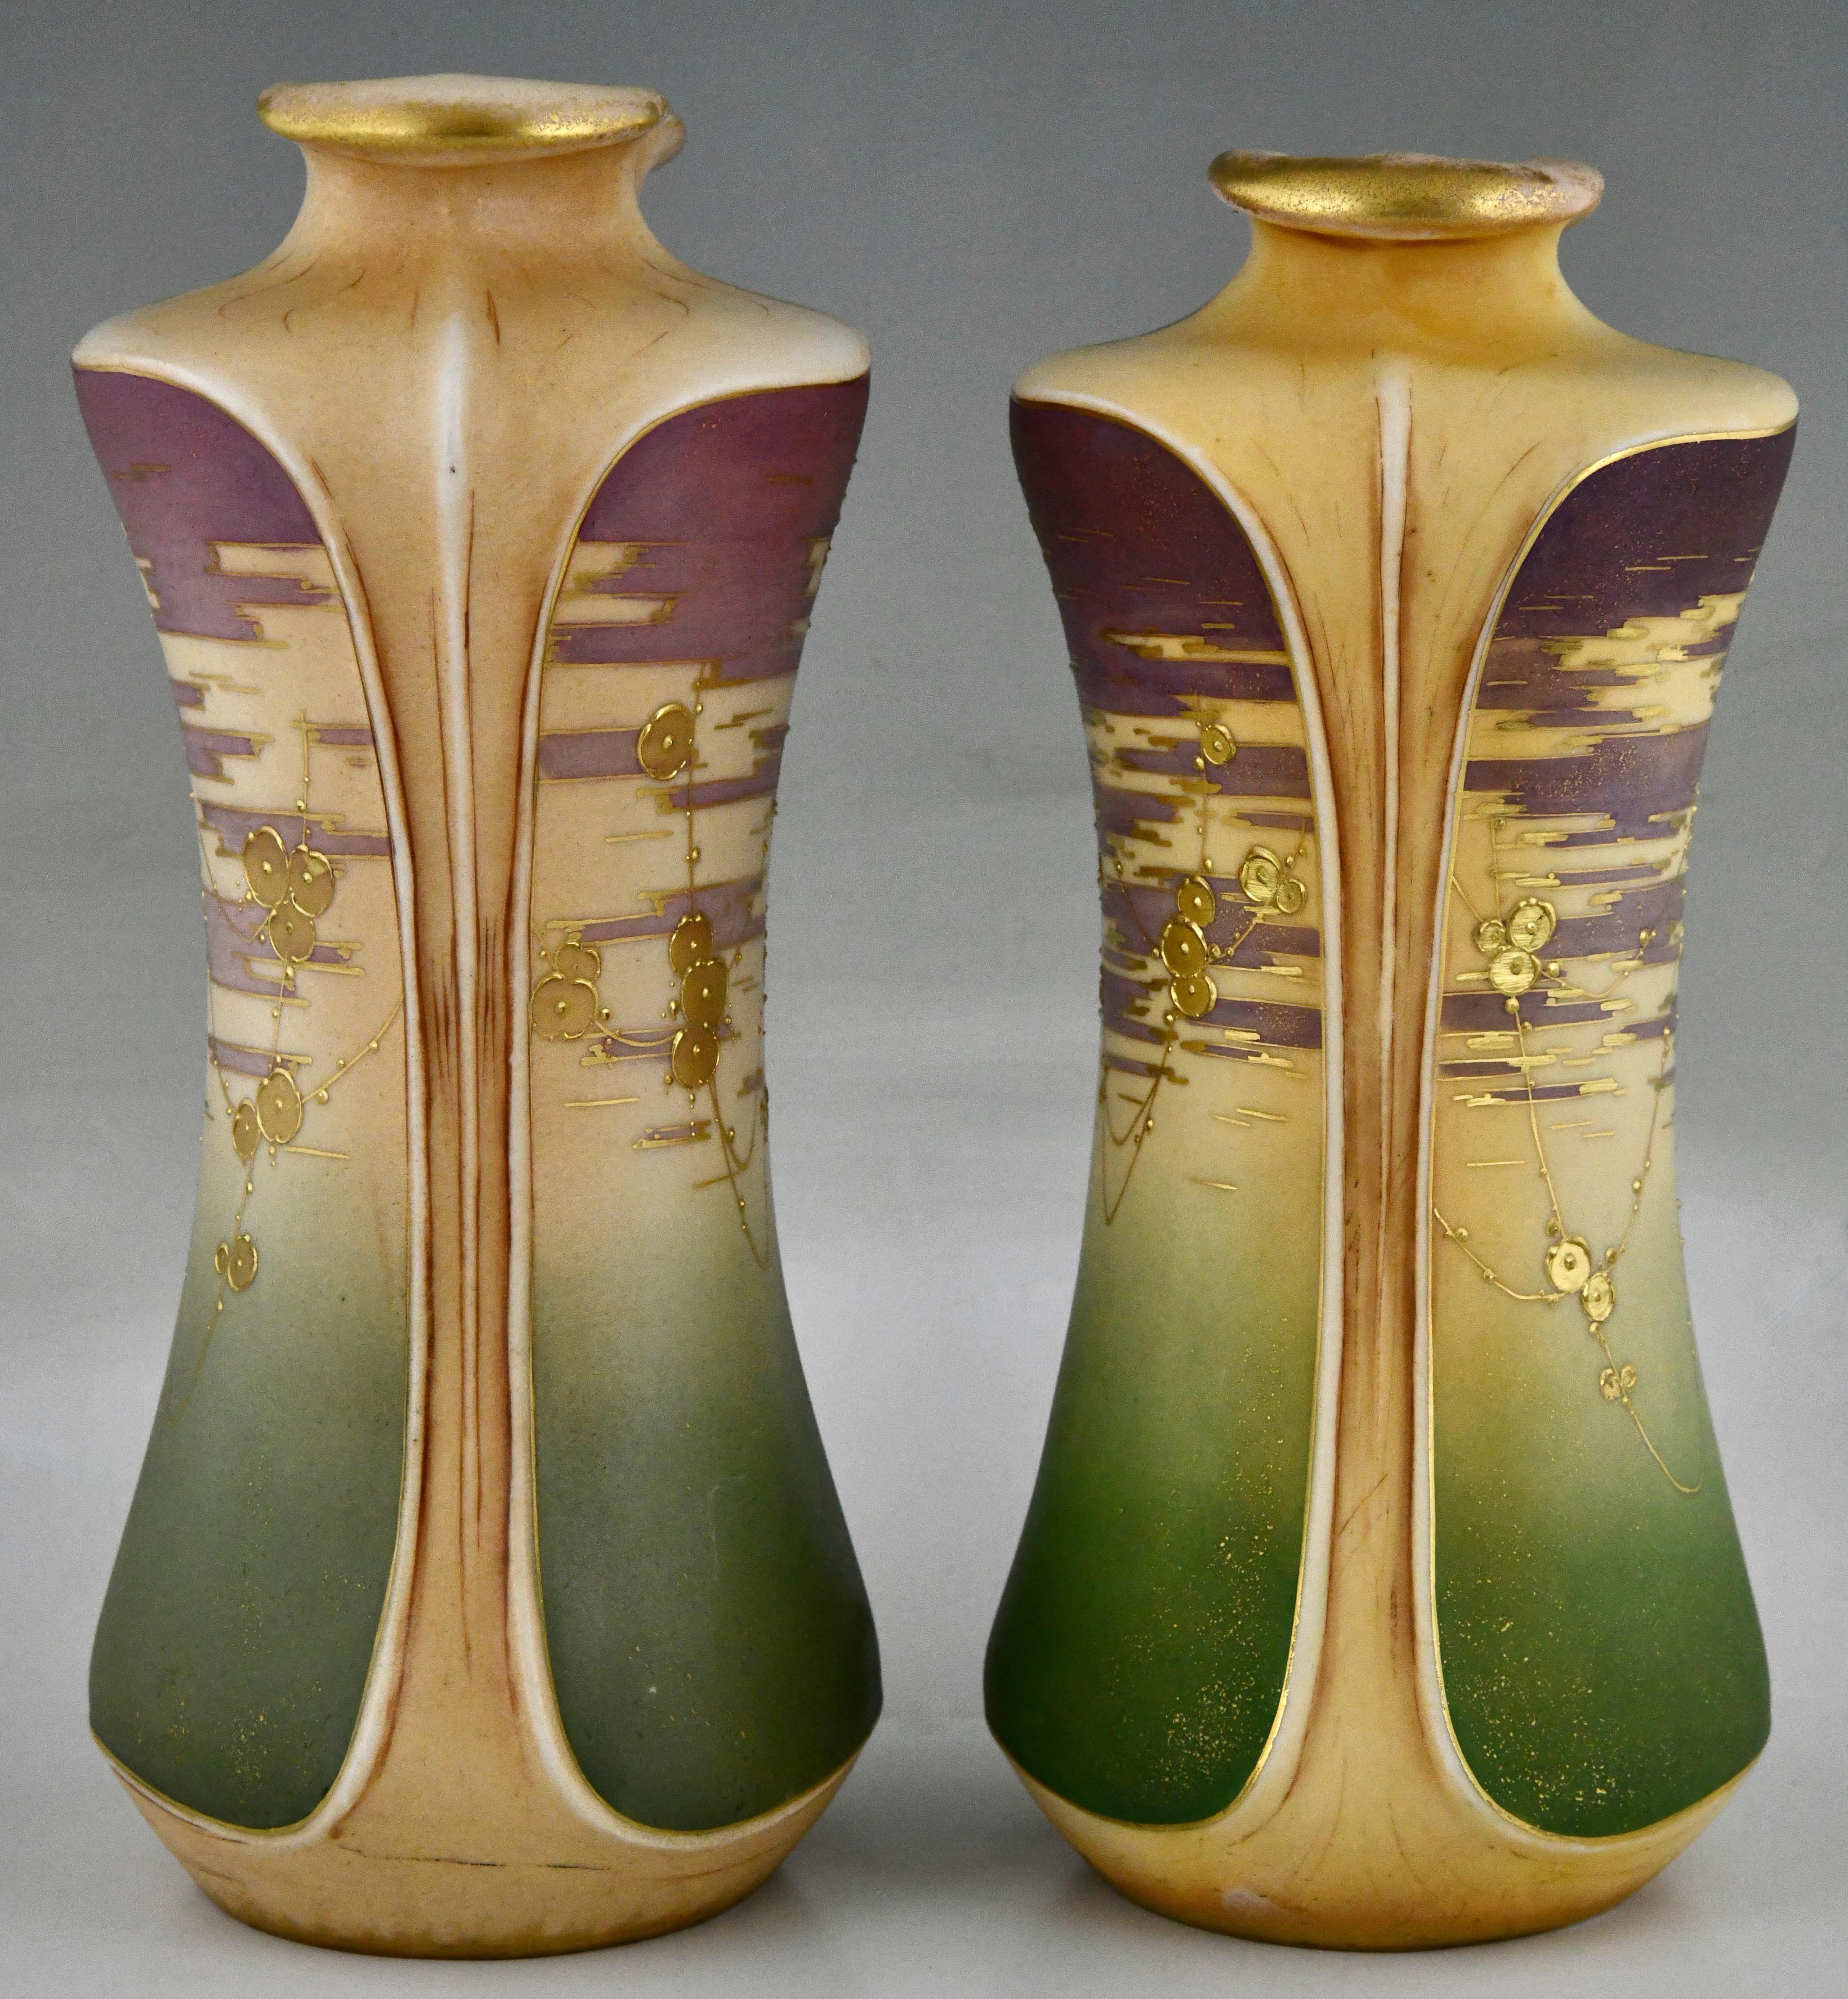 Art Nouveau ceramic vases with gilt flowers by Turn Teplitz Amphora Austria 1900 In Good Condition For Sale In Antwerp, BE